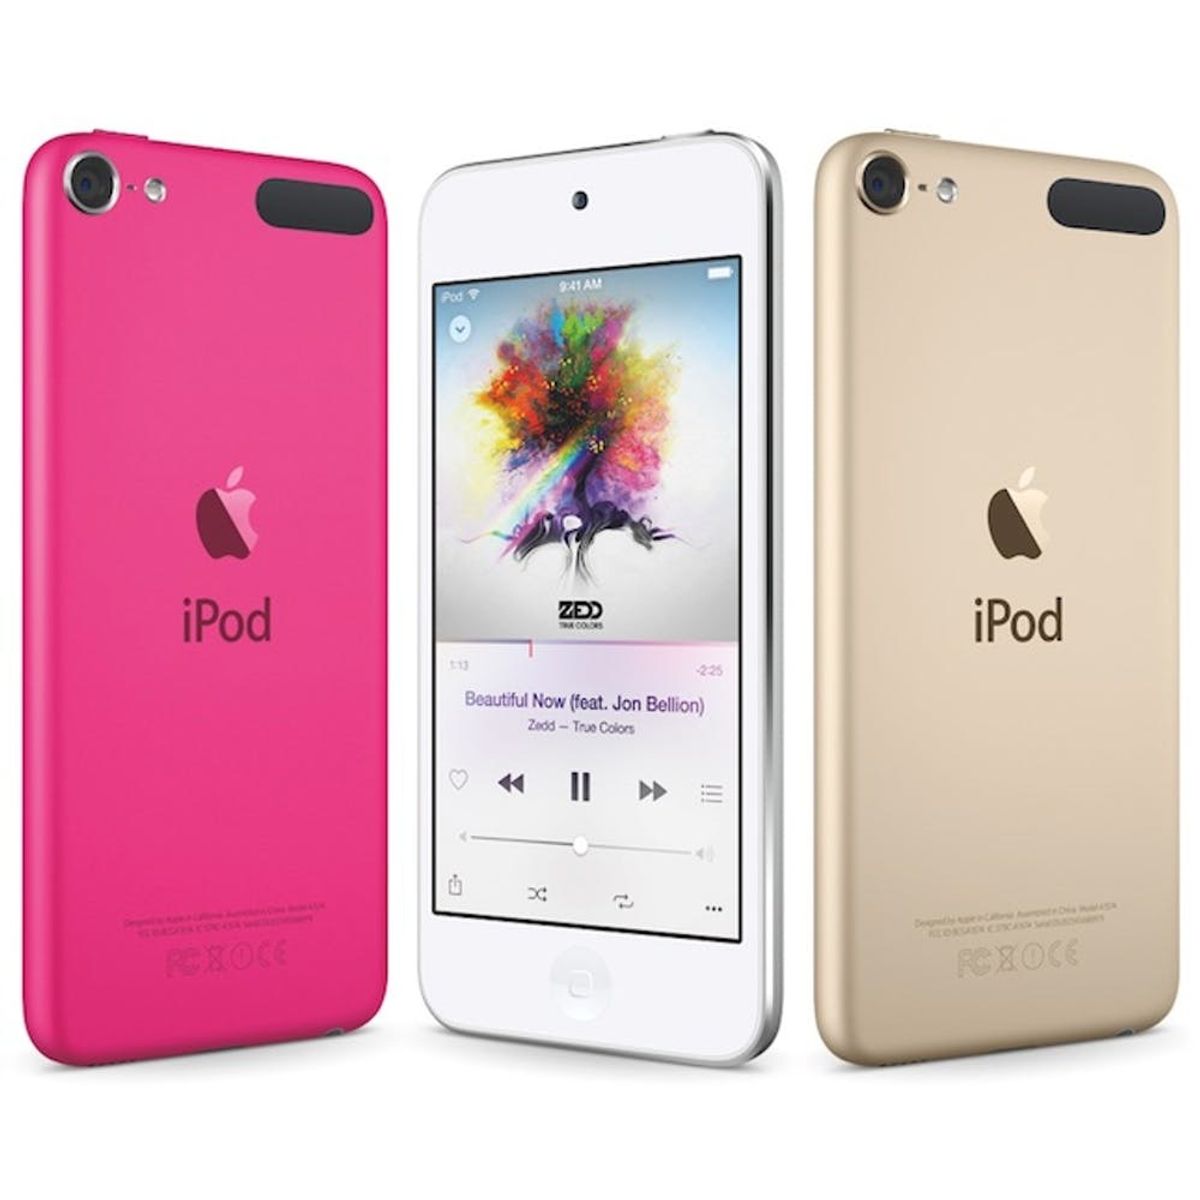 The iPod Touch Is Back! Here’s Why You’ll Want It